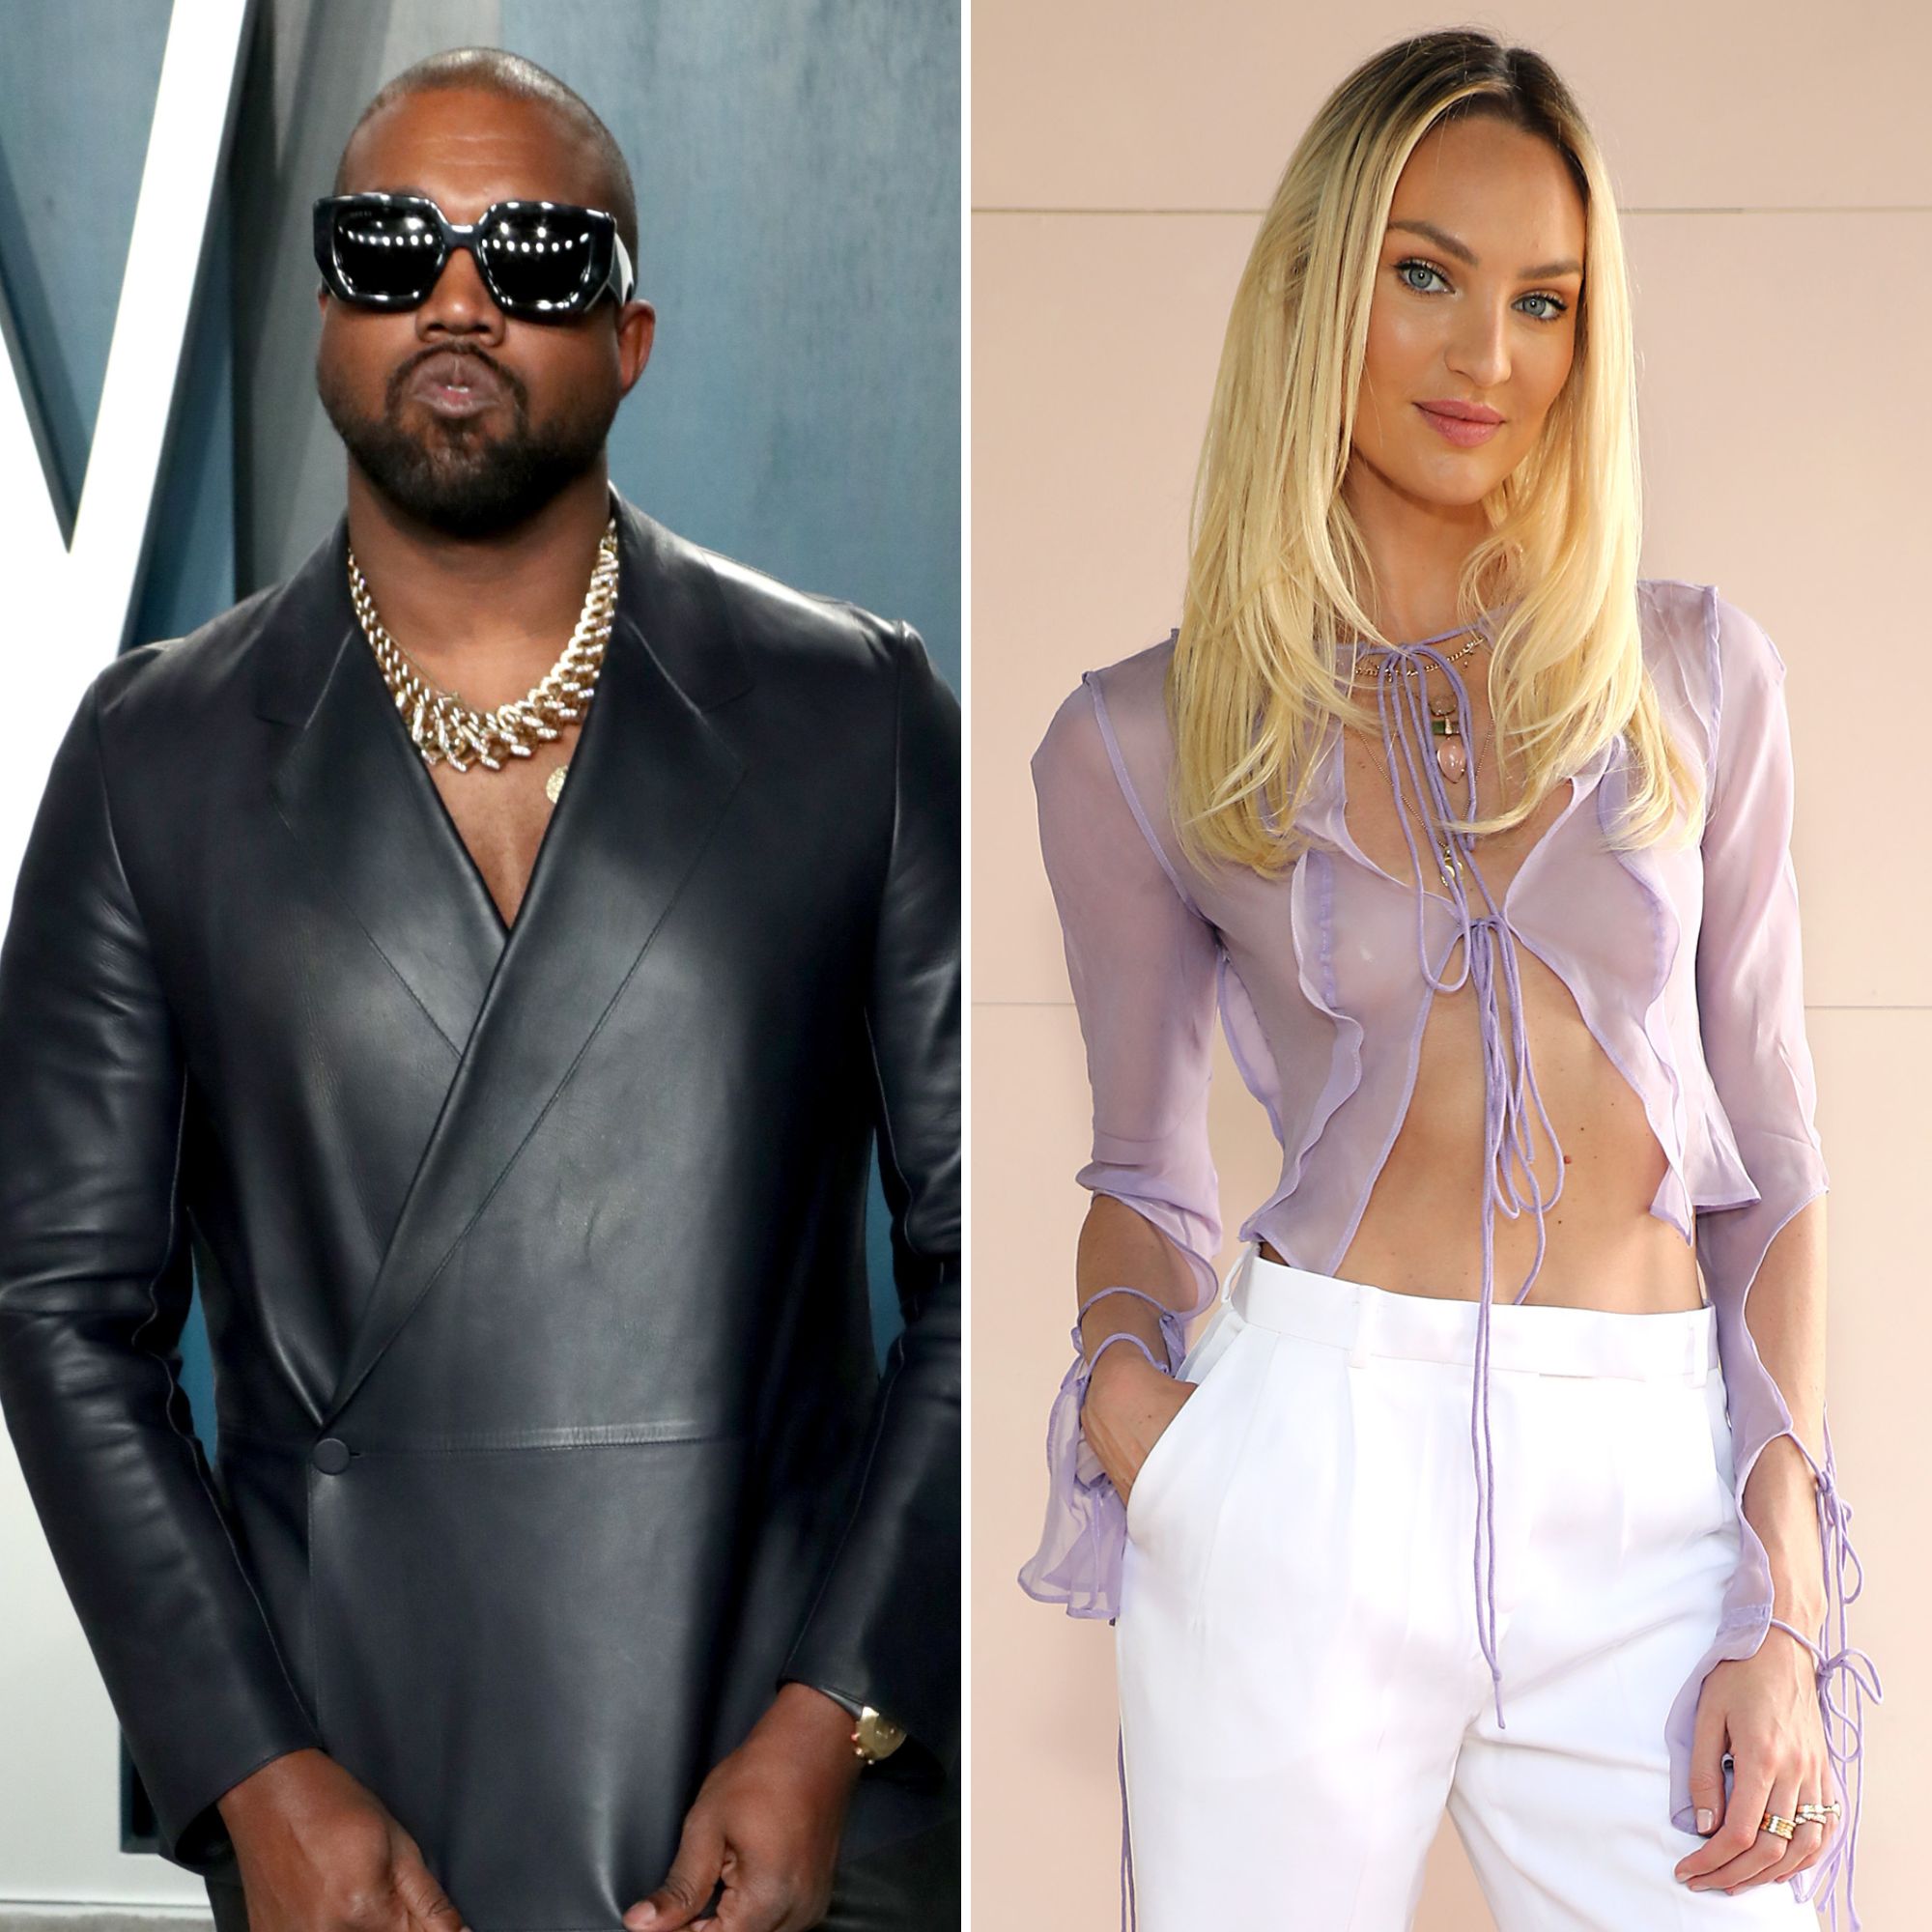 https://www.intouchweekly.com/wp-content/uploads/2022/09/Kanye-West-Candice-Swanepoel-Are-Dating-Romance-Details-.jpg?fit=2000%2C2000&quality=86&strip=all